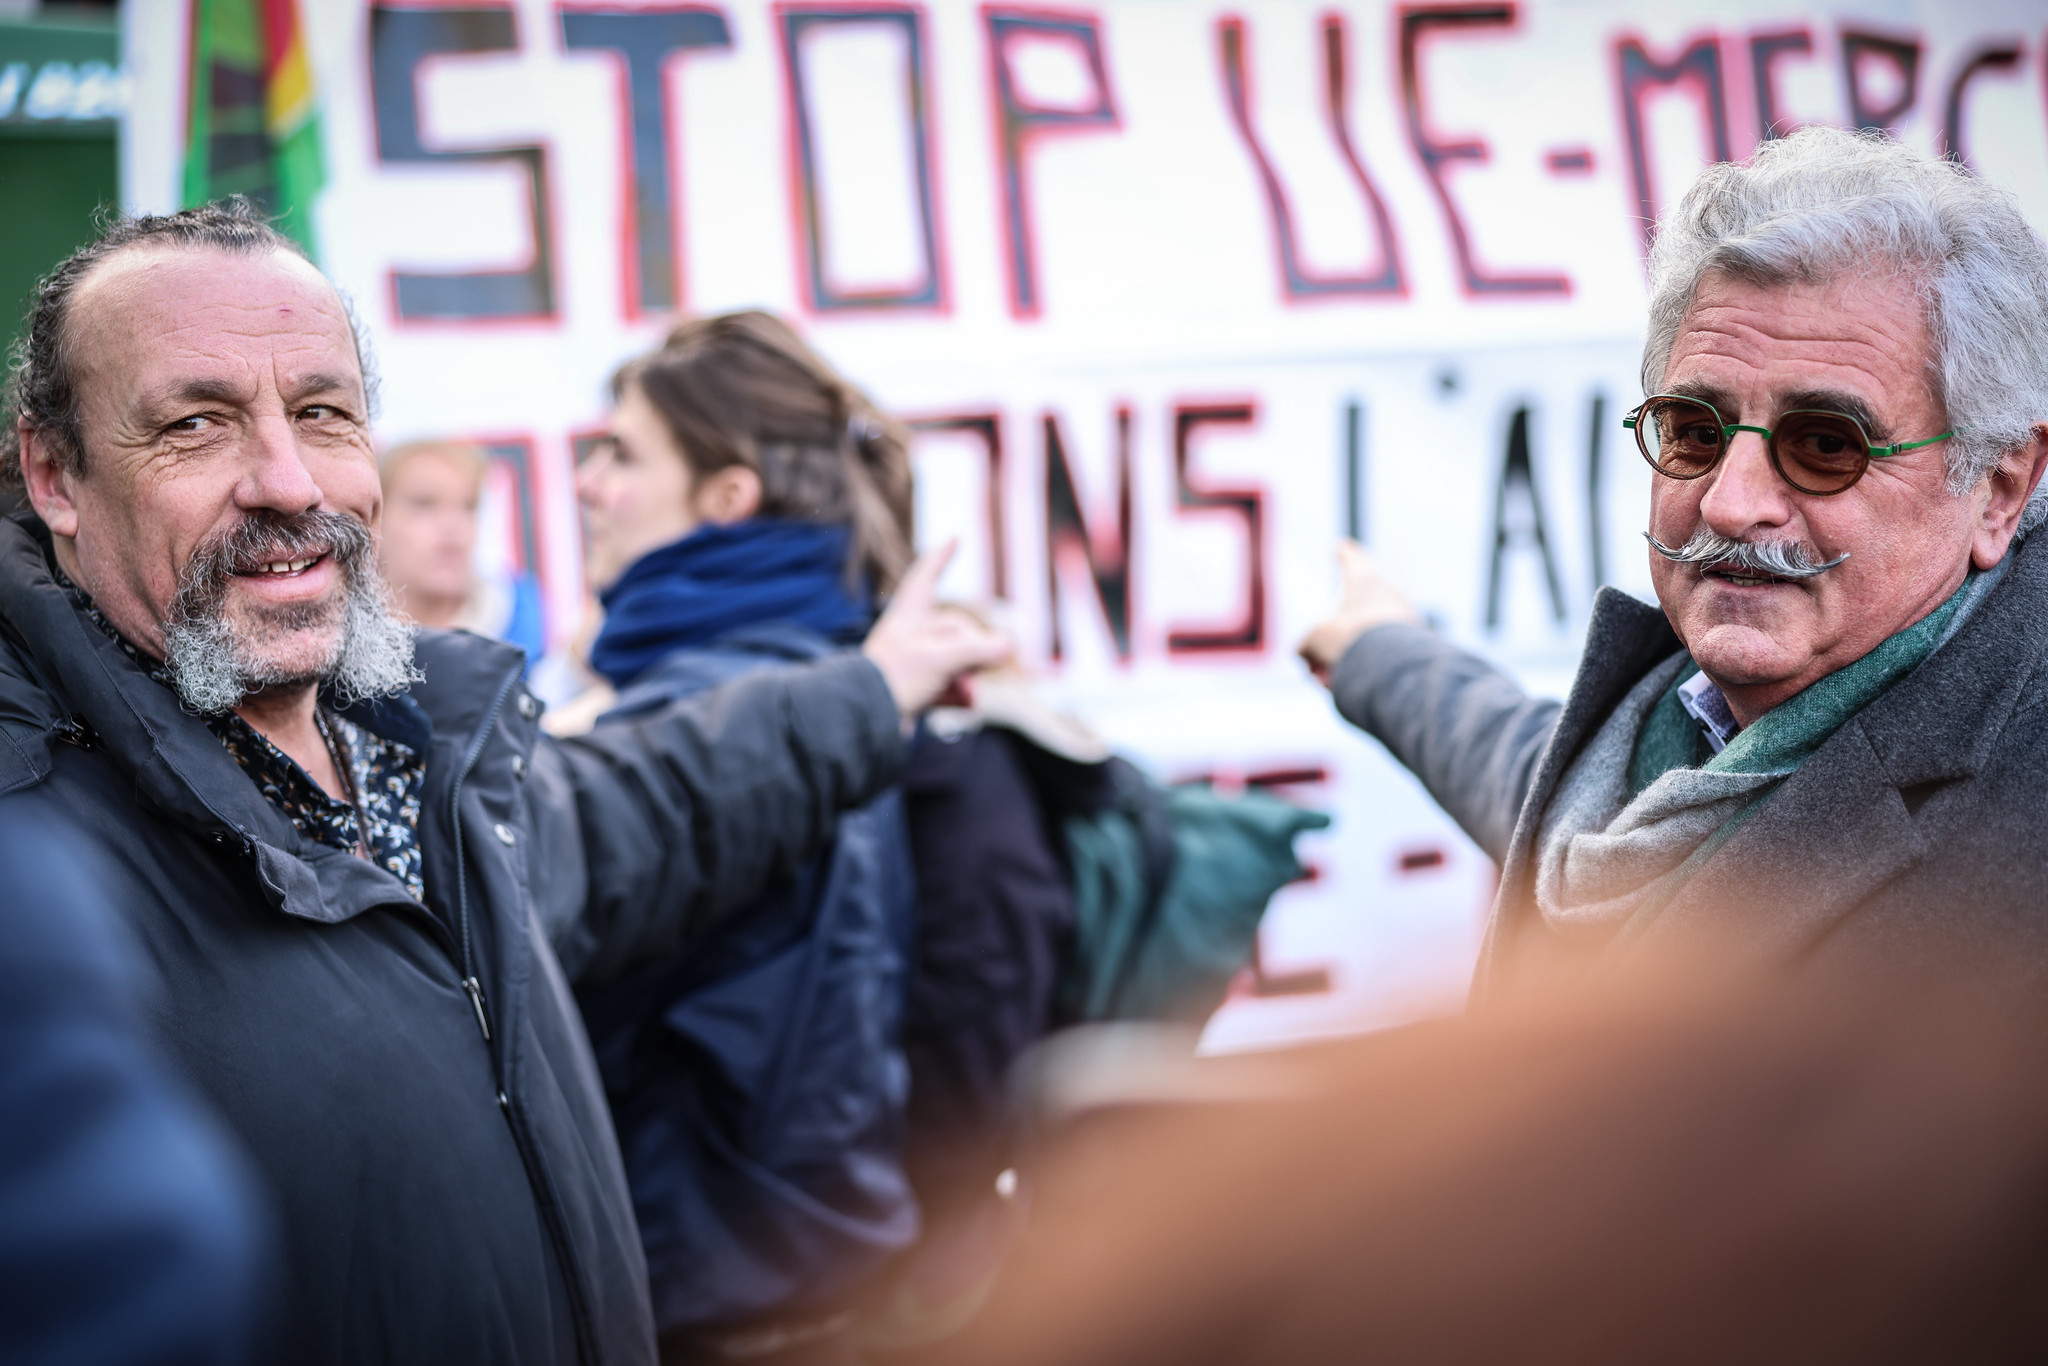 MEPs Benoit Biteau and Claude Gruffat at a farmers protest 